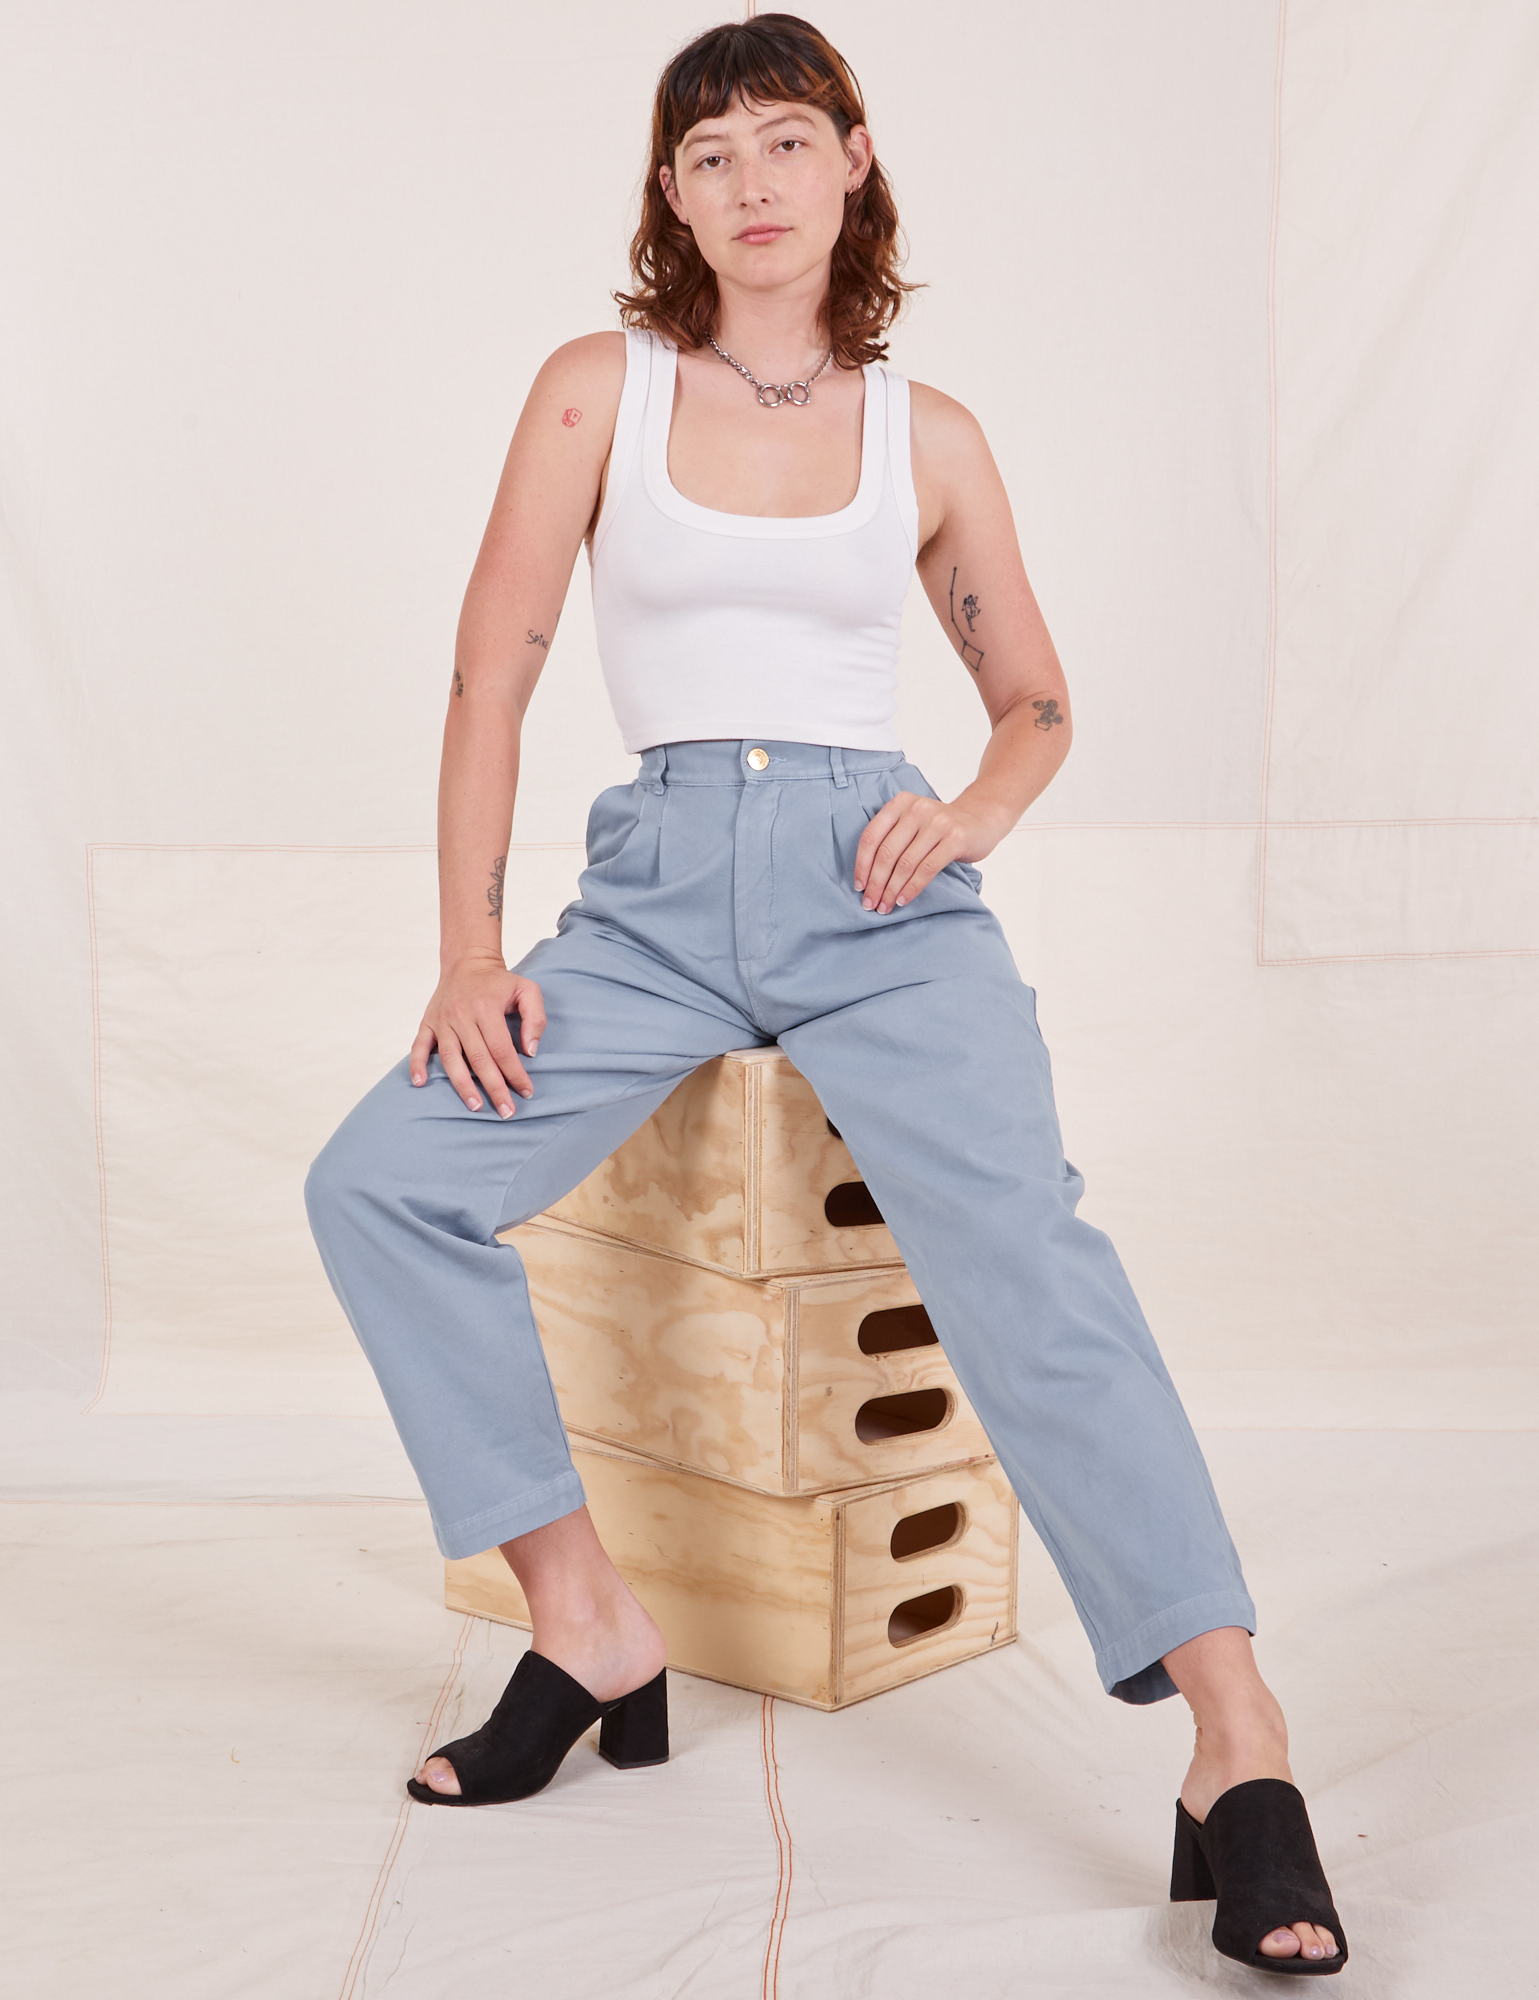 Alex is sitting on a stack of wooden crates wearing Organic Trousers in Periwinkle and Cropped Tank Top in vintage tee off-white